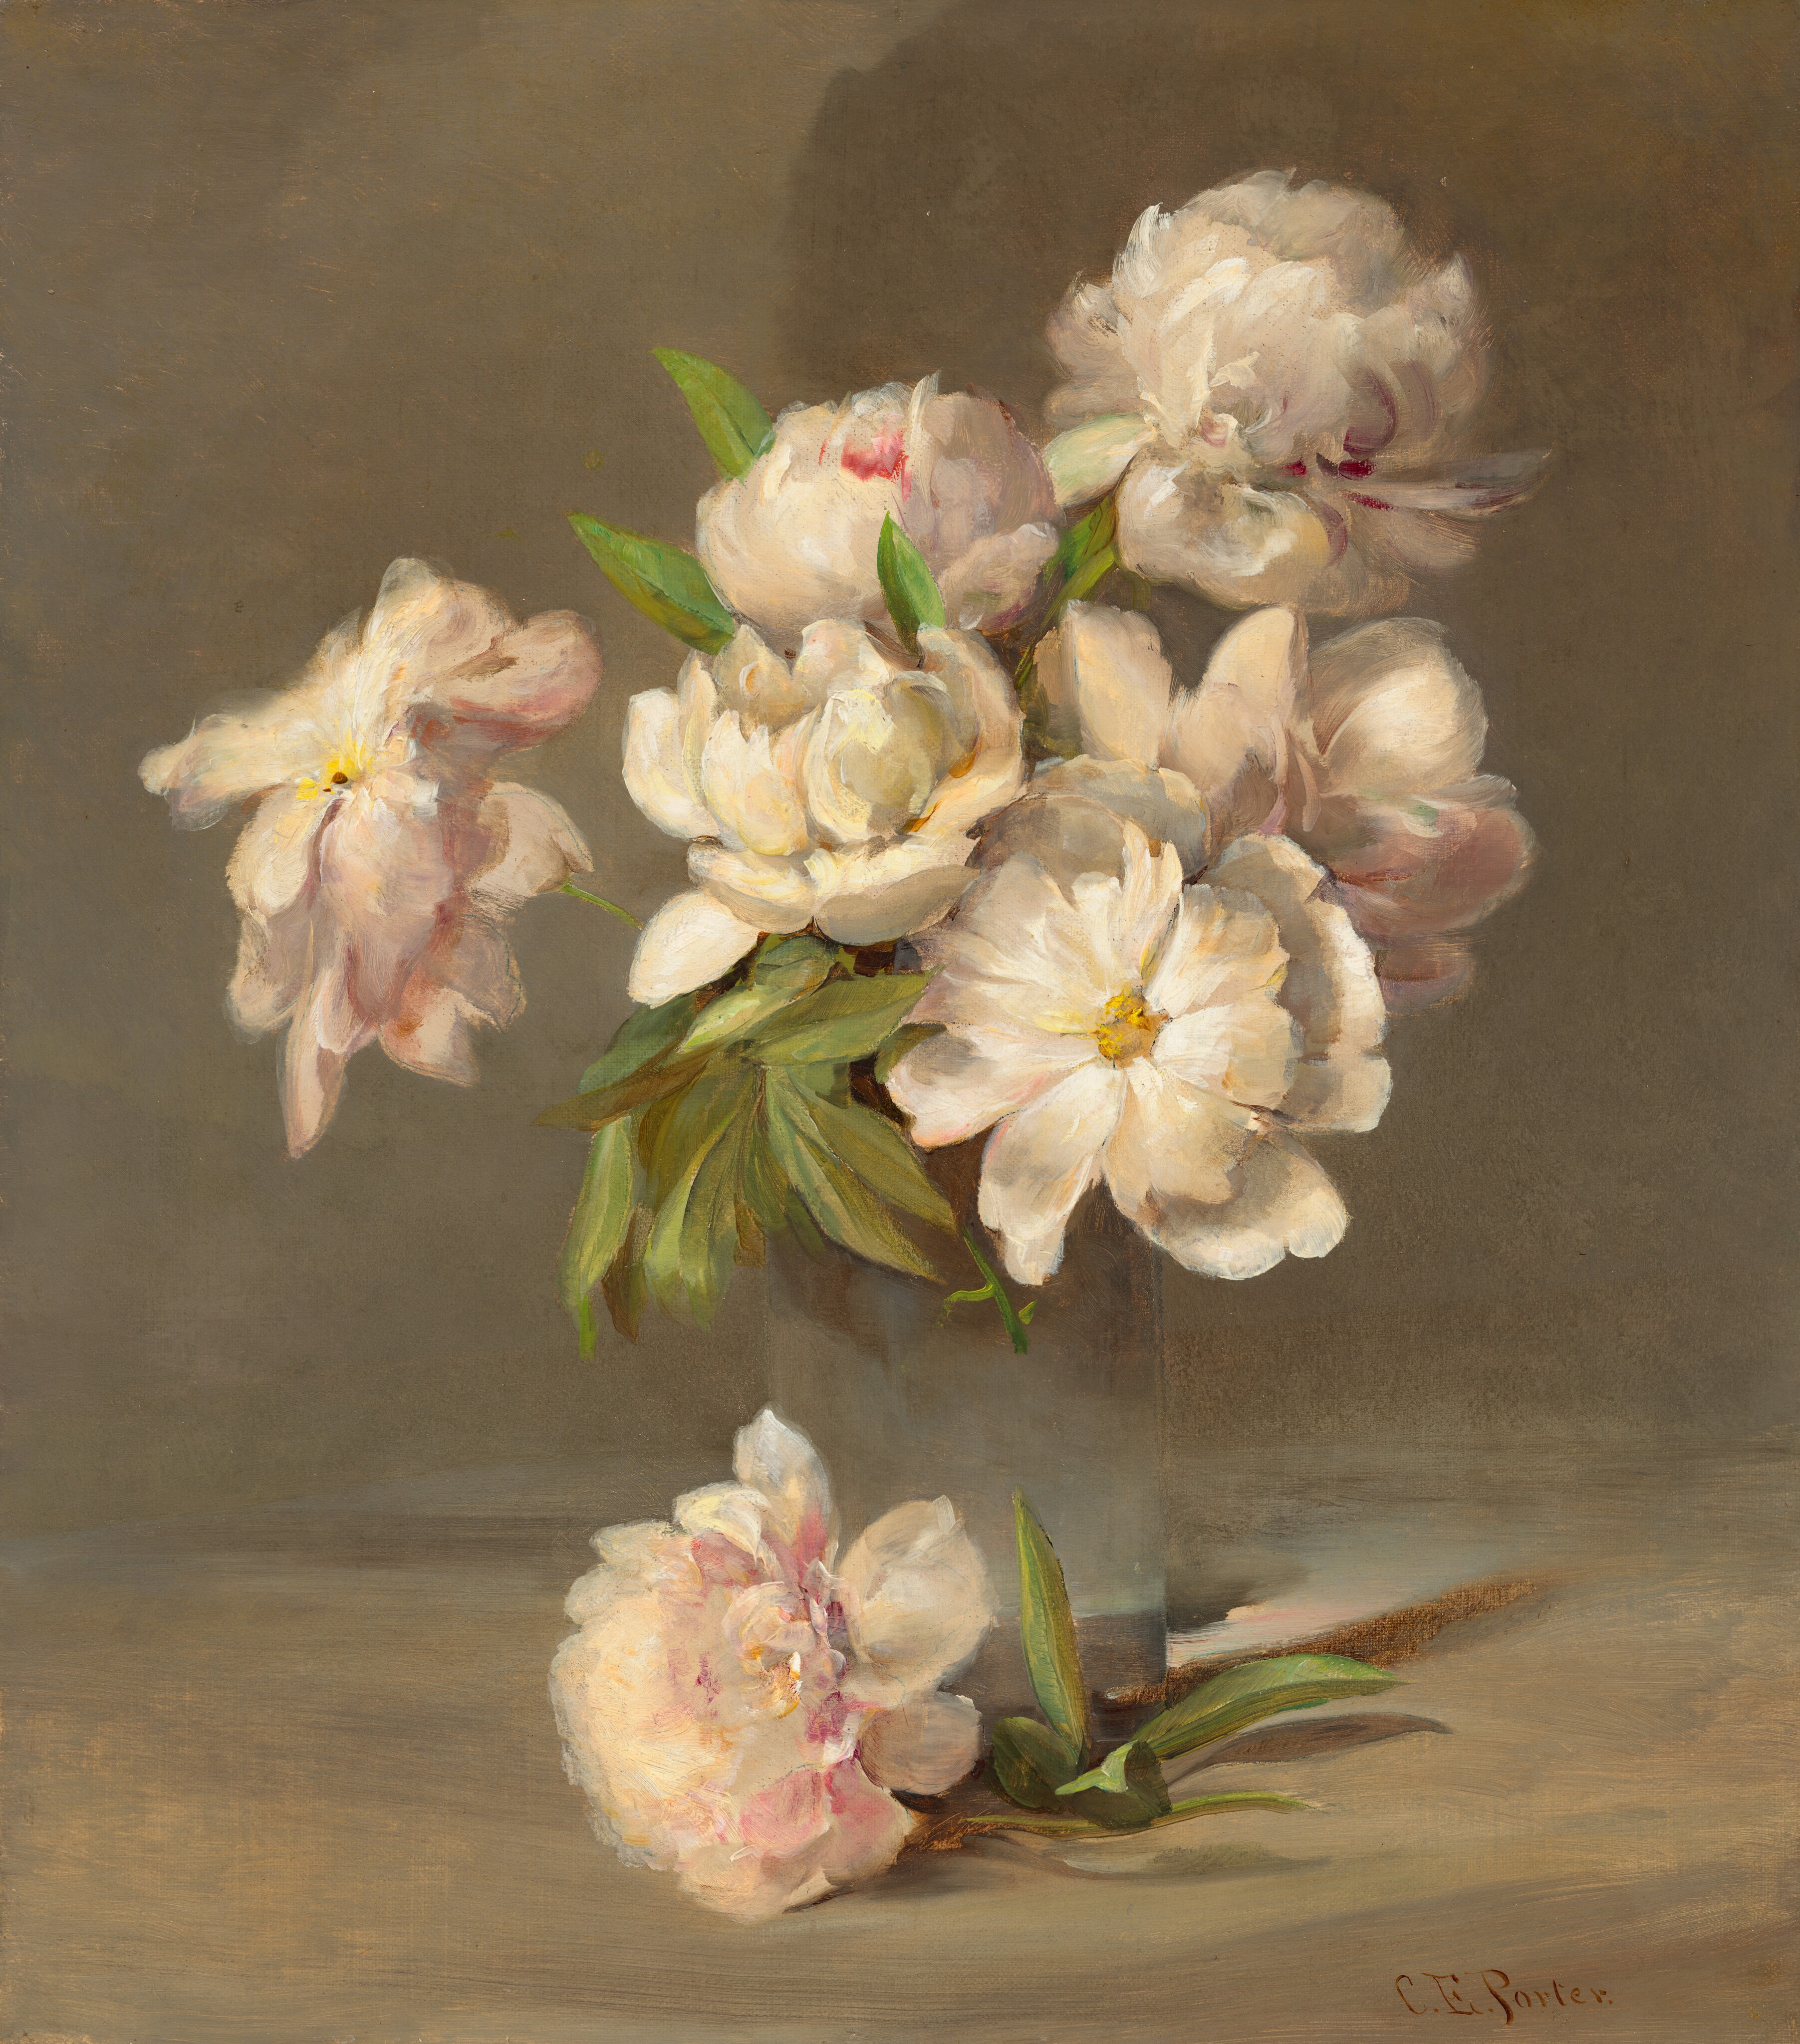 Peonies in a Vase by Charles Ethan Porter - c. 1885 - 45.72 × 40.64 cm National Gallery of Art